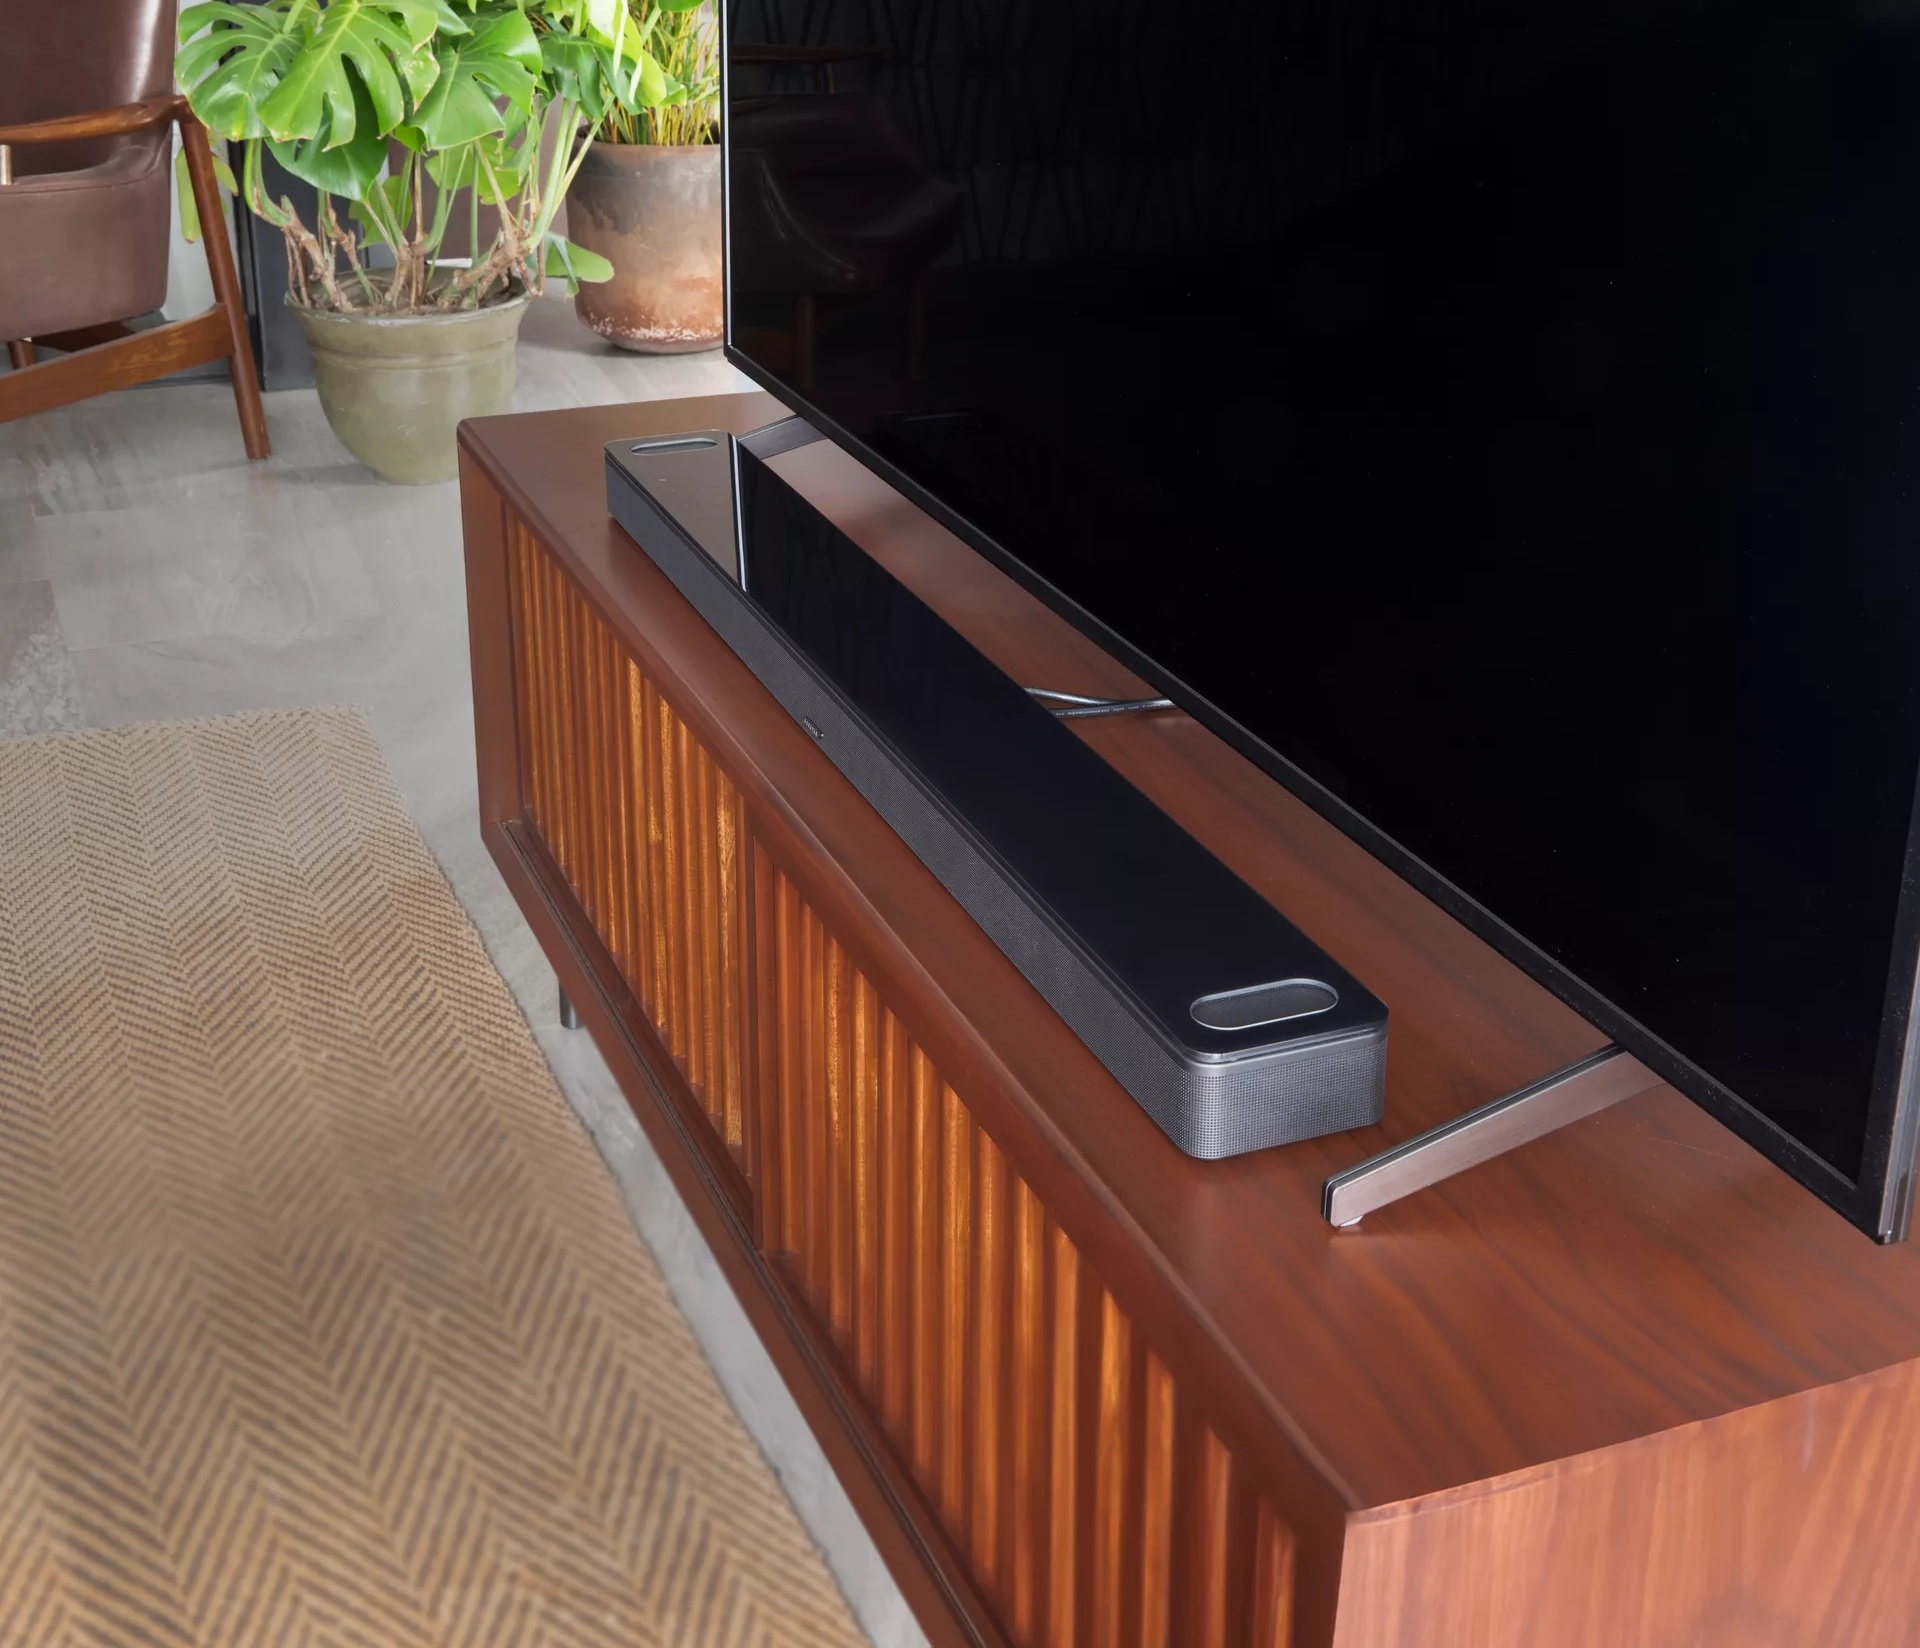 Bose Smart Soundbar 900 on TV stand in front of a television